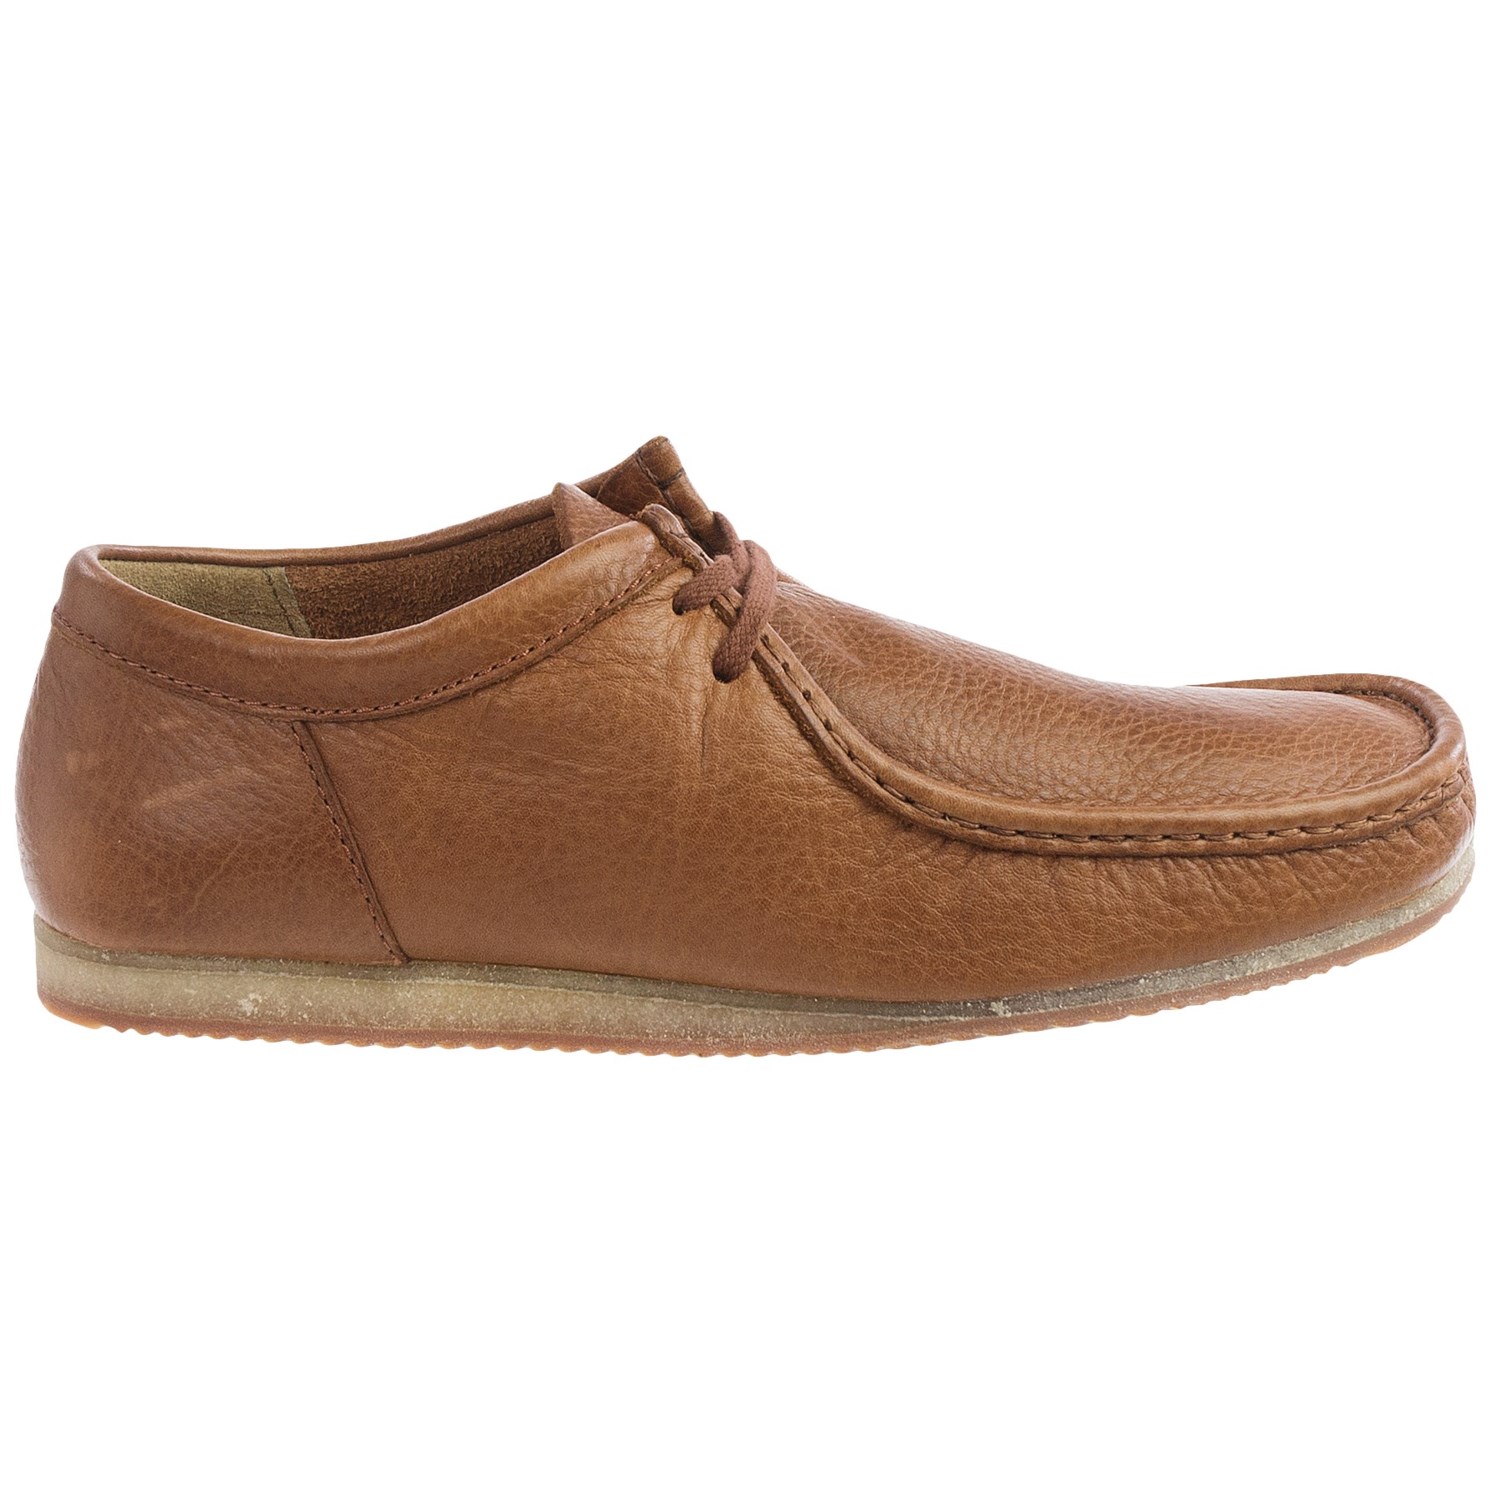 Clarks Wallabee Run Leather Shoes (For Men) - Save 55%